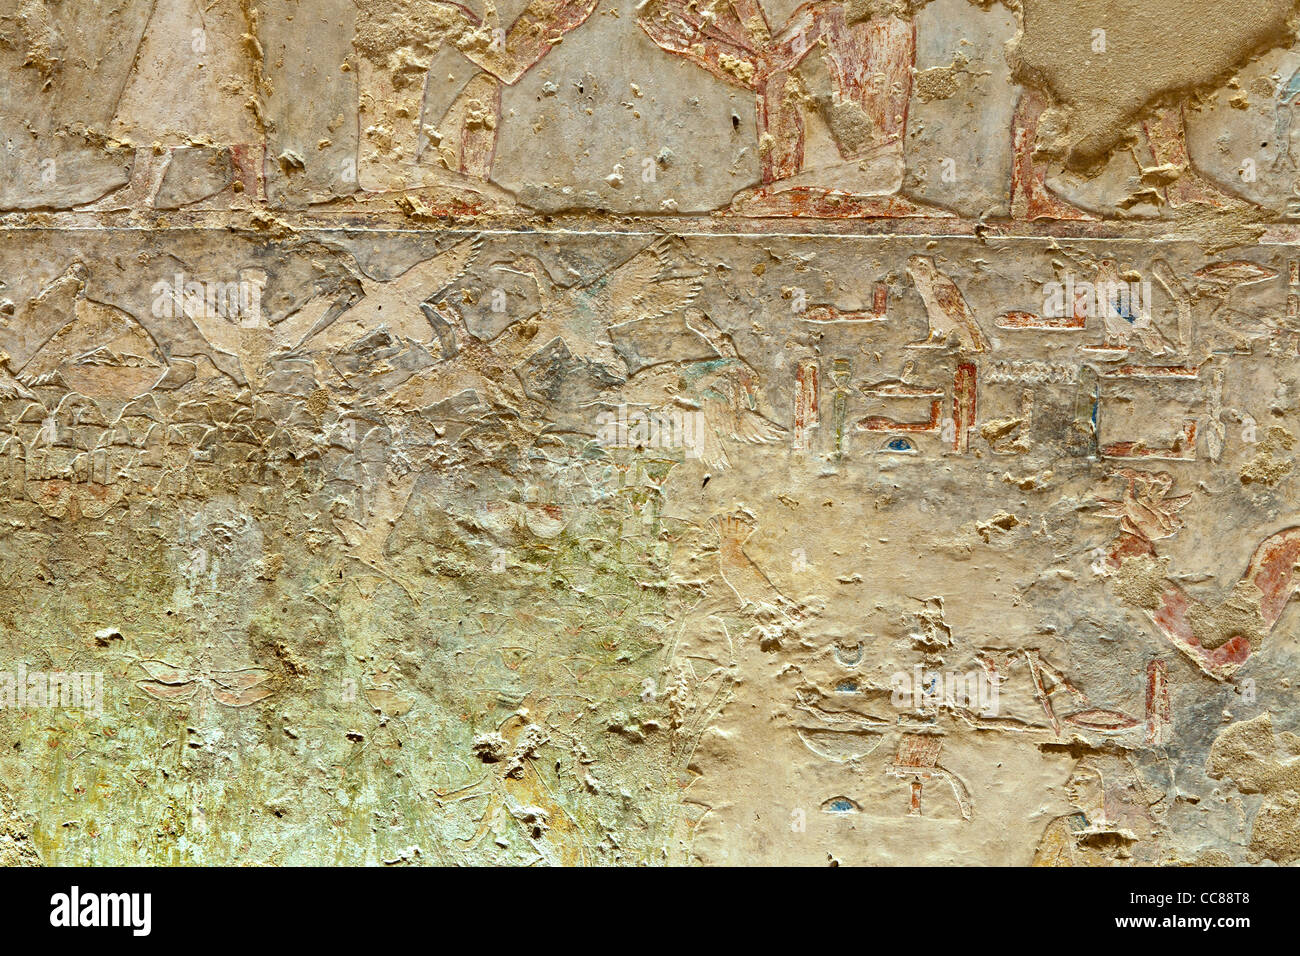 Reliefs in the Middle Kingdom tomb of Senbi Son of Ukh Hotep at Meir , North West of Asyut in Middle Egypt Stock Photo